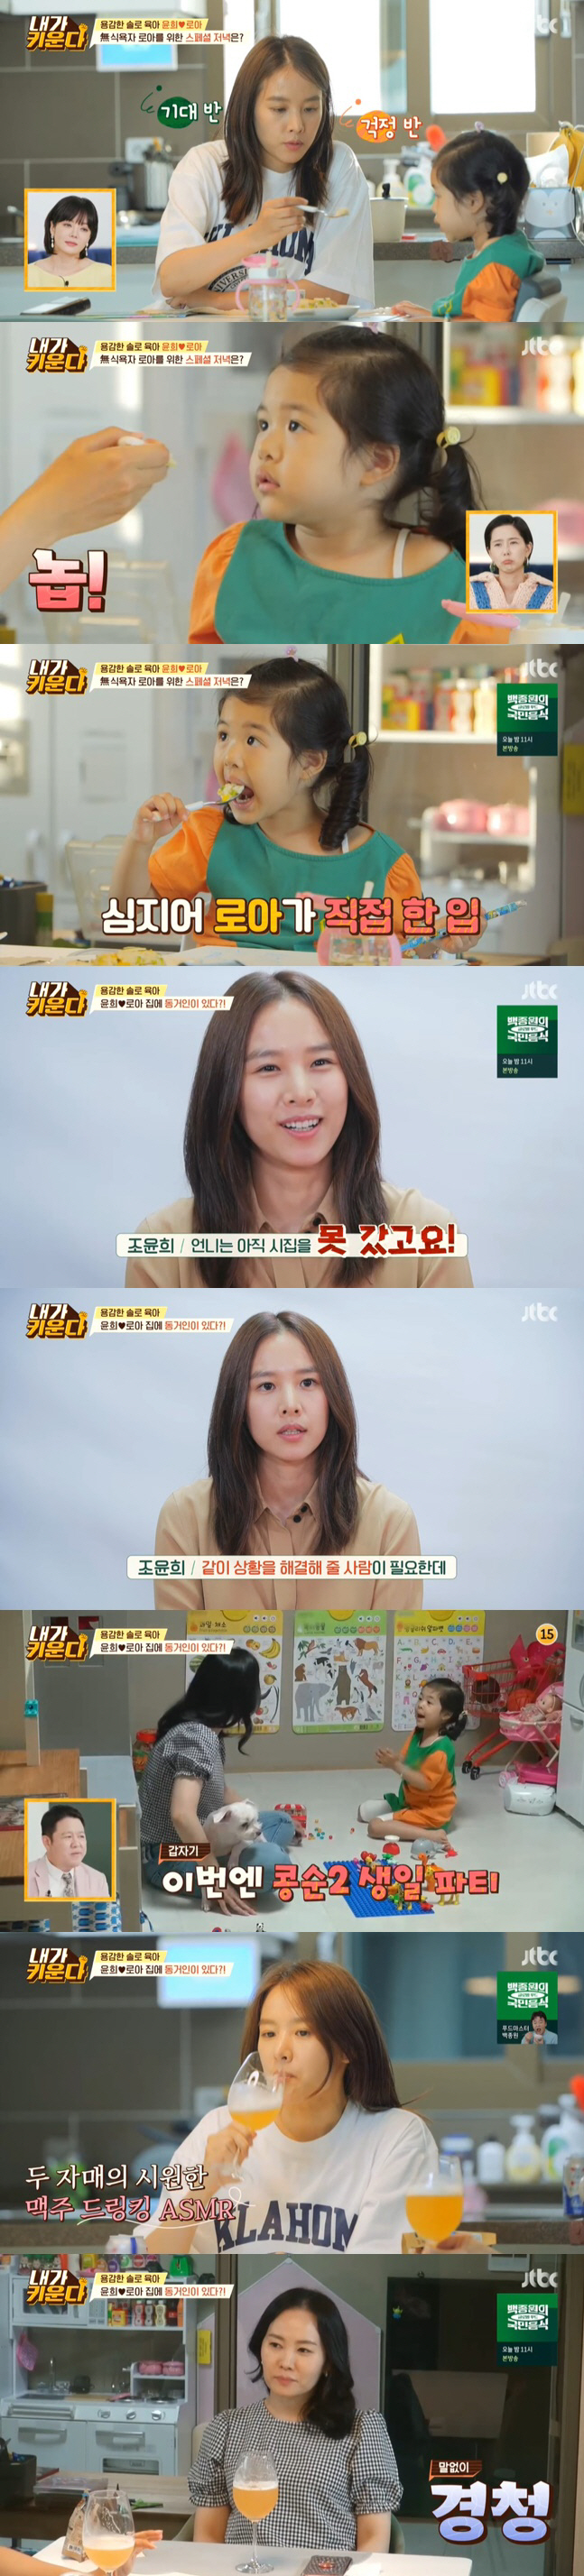 I raise Jo Yoon-hee, Kim Hyun-Sook, Kim Na-young revealed their daily life of raising alone.On the 16th, JTBC Brave Solo Childcare - I Raise, Jo Yoon-hee, Roars family playground visiter and Kim Hyun-Sook and Son Hamins Secret Sunshine life were revealed.On the day Jo Yoon-hee washed Roar and tied his head as soon as he got up, when Jo Yoon-hee caught the eye by completely grooming his curly hair, daughter Roar.Jo Yoon-hee, who went to the playground, was not surprised by the appearance of Roar falling from the swing, but calmly responded to the members great admiration.Jo Yoon-hee calmly responded, saying, Five-year-old Roar, we are brave so that Roar does not panic.Roar showed off the King of the End of The Electric Affinities at the playground.Roar melted the hearts of the cast once again in the form of Friend, the first time he met at the playground, and The Electric Affinities end king, who spoke to his sisters without hesitation.Jo Yoon-hee said: Roar is unrestrained, active in talking to Friends, so many times Ive been in trouble, I like people and I go straight.I get close to the people I first saw. I am a really bright and cheerful child. Jo Yoon-hee said Roar is the opposite of passive self and said: I envy Roar so much.I tell any friend to go and play first and say my opinion without hesitation. I am always honest with my emotional expression. I do what I want to do. Kim Gurado was surprised by Roars The Electric Affinities, saying, I will borrow a big space later when I have a birthday party.Chae Rim looked at the efforts of Jo Yoon-hee, who worked hard to brighten Roar, saying, Roar is bright and actively grown up.But there was also difficulty for mum Jo Yoon-hee, which is the eating habit of daughter Roar, who is usually less interested in food.Jo Yoon-hee challenged Roar to save his appetite with a dish using squid to regain Roars appetite, but Roar did not try to eat it easily.Nevertheless, Jo Yoon-hee tried to get Roar to eat squid until the end, and with the efforts of Jo Yoon-hee, Roar eventually ate squid deliciously.At this time, Jo Yoon-hees sister appeared; Jo Yoon-hees sister is an English language school counselor and lives together with Jo Yoon-hees proposal.Jo Yoon-hee said, When Roar has an emergency, I need someone to solve the situation together, and I was worried that I would be embarrassed by myself.My sister said she could help me, so I wanted to live with her. I am getting too much help from her. My sister played with Roar and had a drink with Jo Yoon-hee, helping Jo Yoon-hee like a husband.Kim Hyun-Sook first unveiled Secret Sunshines life with 7-year-old son Hamin.Kim Hyun-Sook, a seven-month solo child care worker, asked how he felt as a soloist.If everyone has a child, it is not easy to make that decision, he said. But I had to grow up well, so I did not have time to lament.I heard a lot of ideas about how to raise Son well, he replied honestly. Son does not know the concept of divorce yet.But I know Father isnt there for me now. I just say, I miss him. And I feel sore.Im trying to overcome it, though its difficult for me, he said.Kim Hyun-Sook was living with three generations from Secret Sunshine to son Hamin and his parents.The magnificent Secret Sunshine house was envious of a nature-friendly space that ran from a spacious yard to a garden.Kim Hyun-Sook also admired the breakfast table with miso and grown vegetables dipped in person.Kim Na-young shouted I envy and said, Please find a house in Secret Sunshine.Kim Hyun-Sooks son Hamins daily life, which showed off the same activeness as the Energy, was also revealed. Hamins hobby is to pick vegetables in the garden, and his specialty is to eat miso and stay at home.It has emerged as a new dark horse of the childrens food system, which eats pork belly on miso soup and rolls rice in miso soup.Kim Hyun-Sooks confession about raising a child alone also followed.Kim Hyun-Sook, whose mother remarried and Father was not her biological father, said, When Father made a difficult decision, Father first said, Do not worry about your decision.Well be the support. And first he offered to come into Secret Sunshines house.Thank you so much, he said, showing tears in gratitude, making everyone cry.Kim Na-youngs remaining Haru, who revealed his daily life with two sons of High Tension of the Reversal, was also released in the last broadcast. Kim Na-young took an ad shoot with his children.I wanted to make sure the shooting was going smoothly, but my brother Lee Joon started to cry while he was chatting with his brother.Kim Na-young said, When this situation happens, advertisers and staffs start to notice, I can not get angry, and I get smaller.Kim Na-young, who had returned home since then, began washing her psoriasis, but in the meantime, her brother Lee Joon had a major accident: painting a toy car with crayons.But Kim Na-young said, I am wrong to put Crepas there. He told Lee Joon not to play such a game in the future.Chae Rim said, I really want to cheer on Kim Na-youngs tough Haru, and sympathized with the grievances of solo childcare more than anyone else.